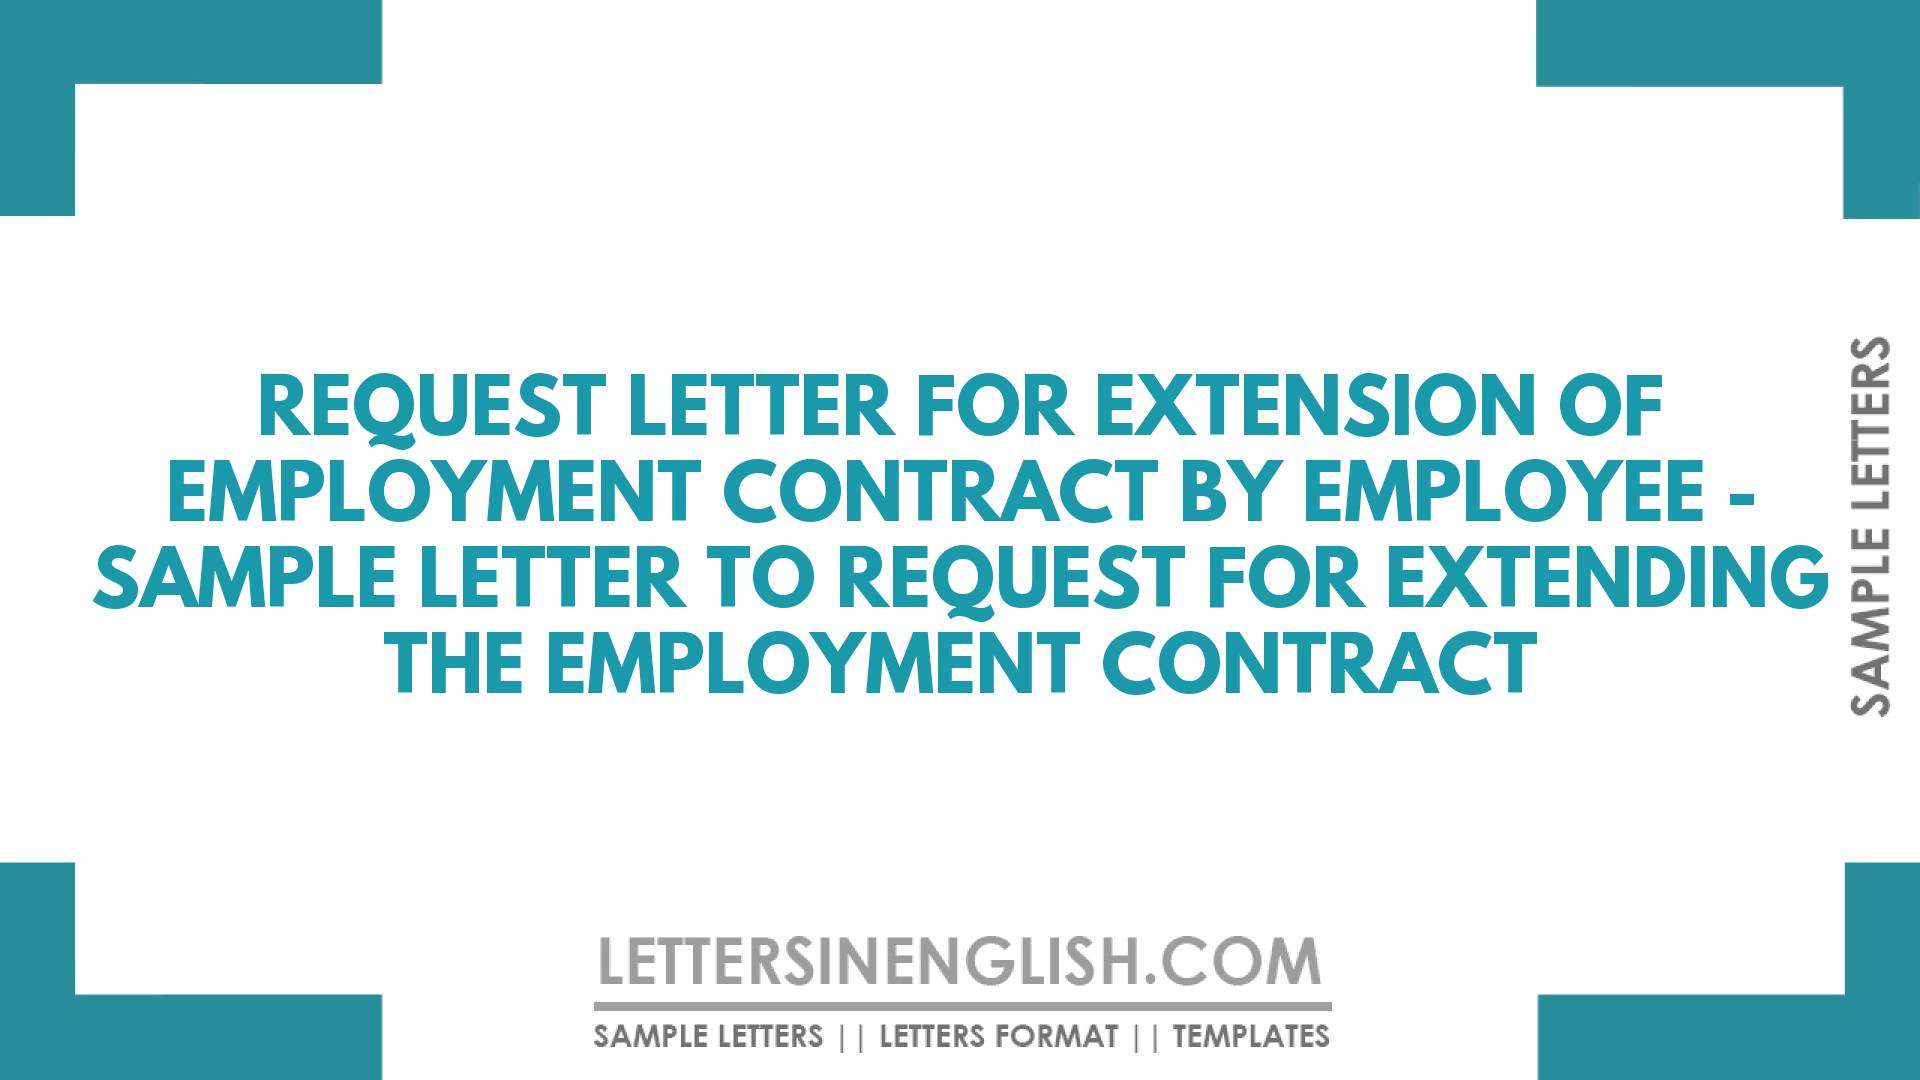 Request Letter for Extension of Employment Contract by Employee – Sample Letter to Request for Extending the Employment Contract